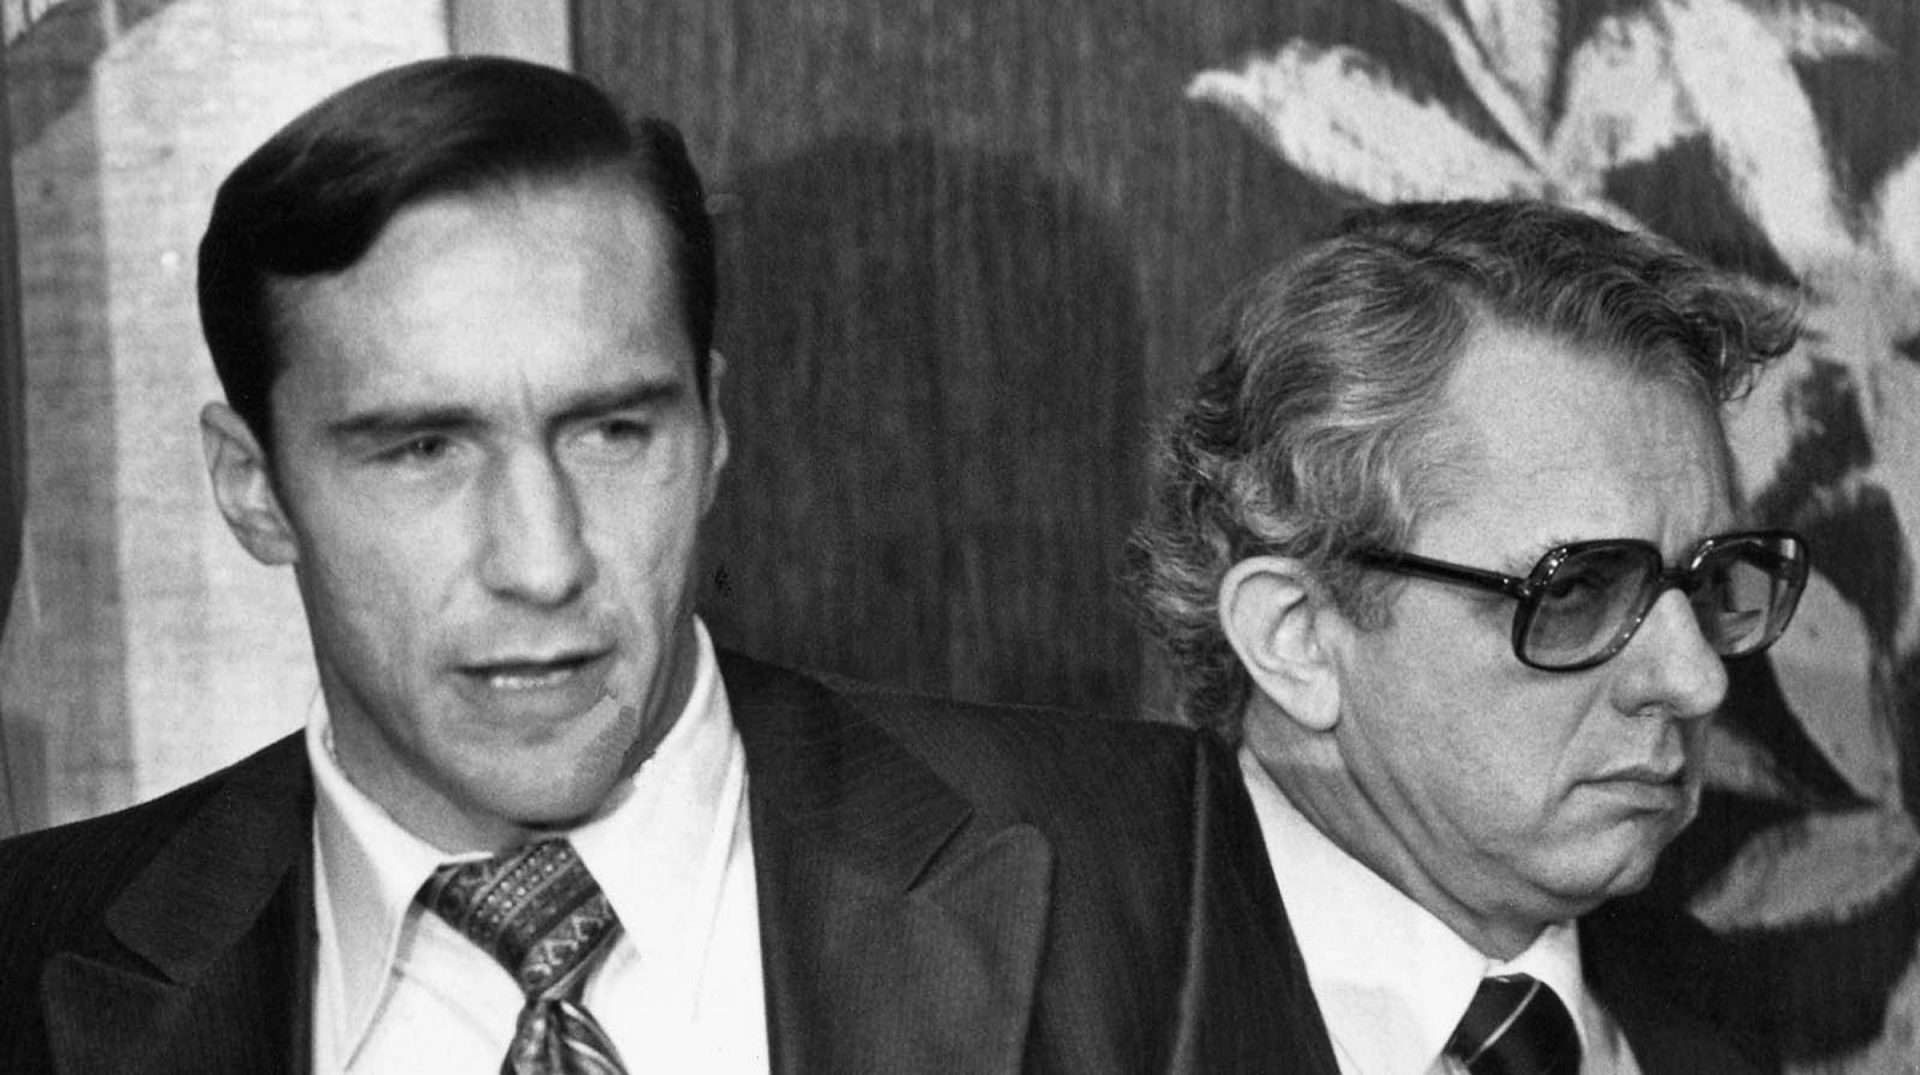 Walter Creitz, right, president of Metropolitan Edison Company, turns away as company Vice President John Herbein answers questions at a news conference in Hershey, Pa., on March 29, 1979. The conference was held because of an accident that occured at the company's Three Mile Island nuclear power plant near Harrisburg, Pa., that caused radiation leakage into the atmosphere.